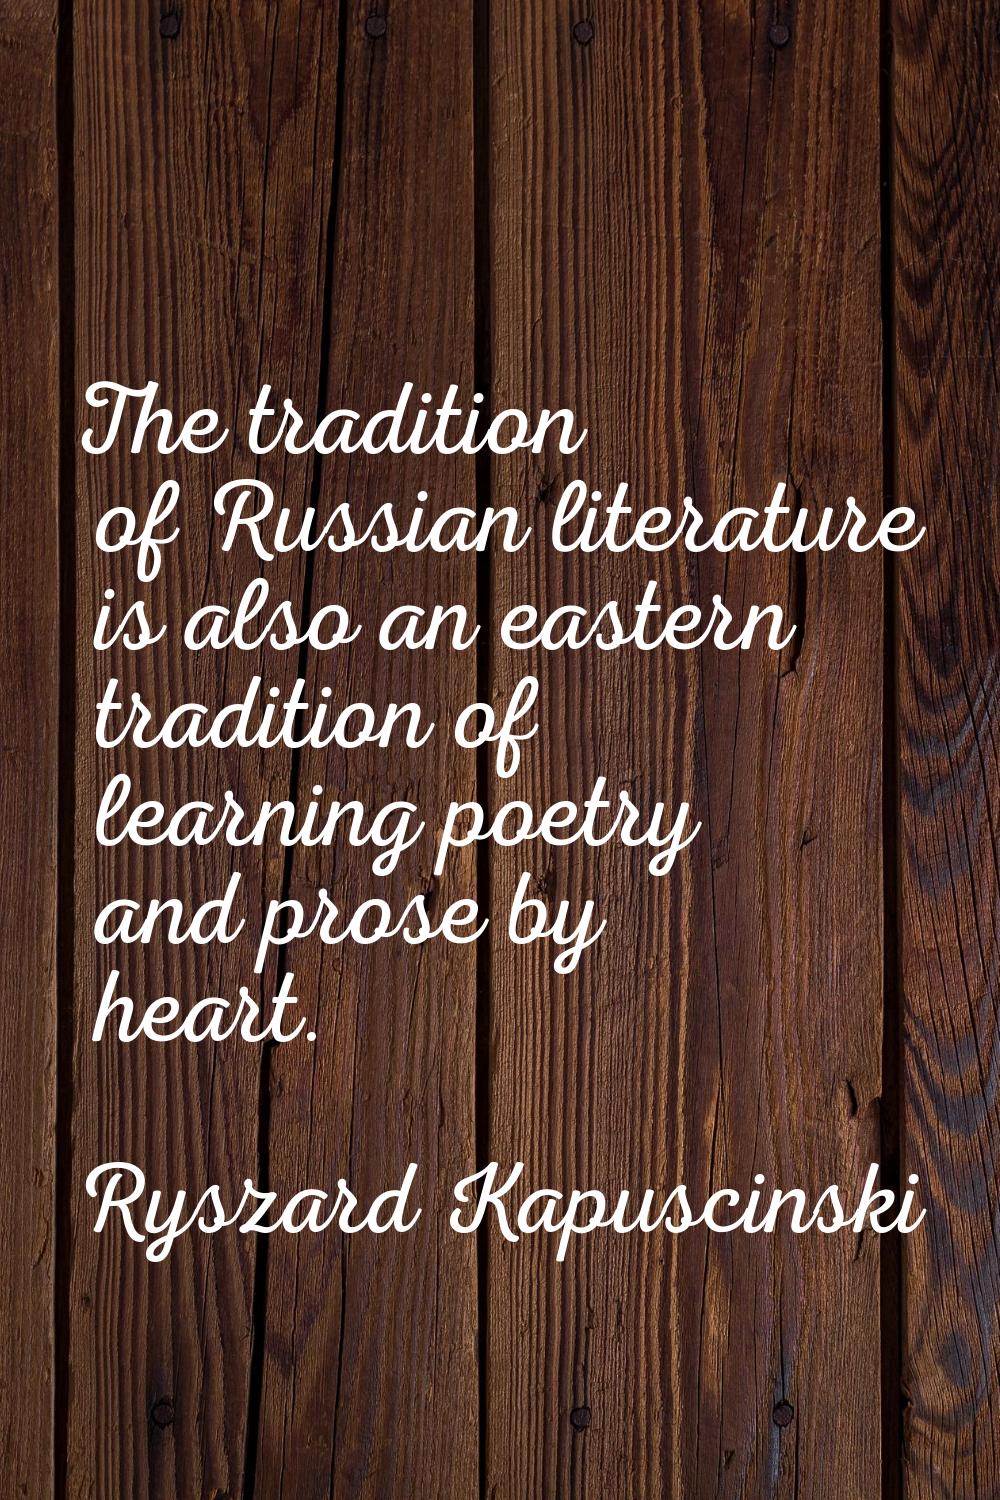 The tradition of Russian literature is also an eastern tradition of learning poetry and prose by he